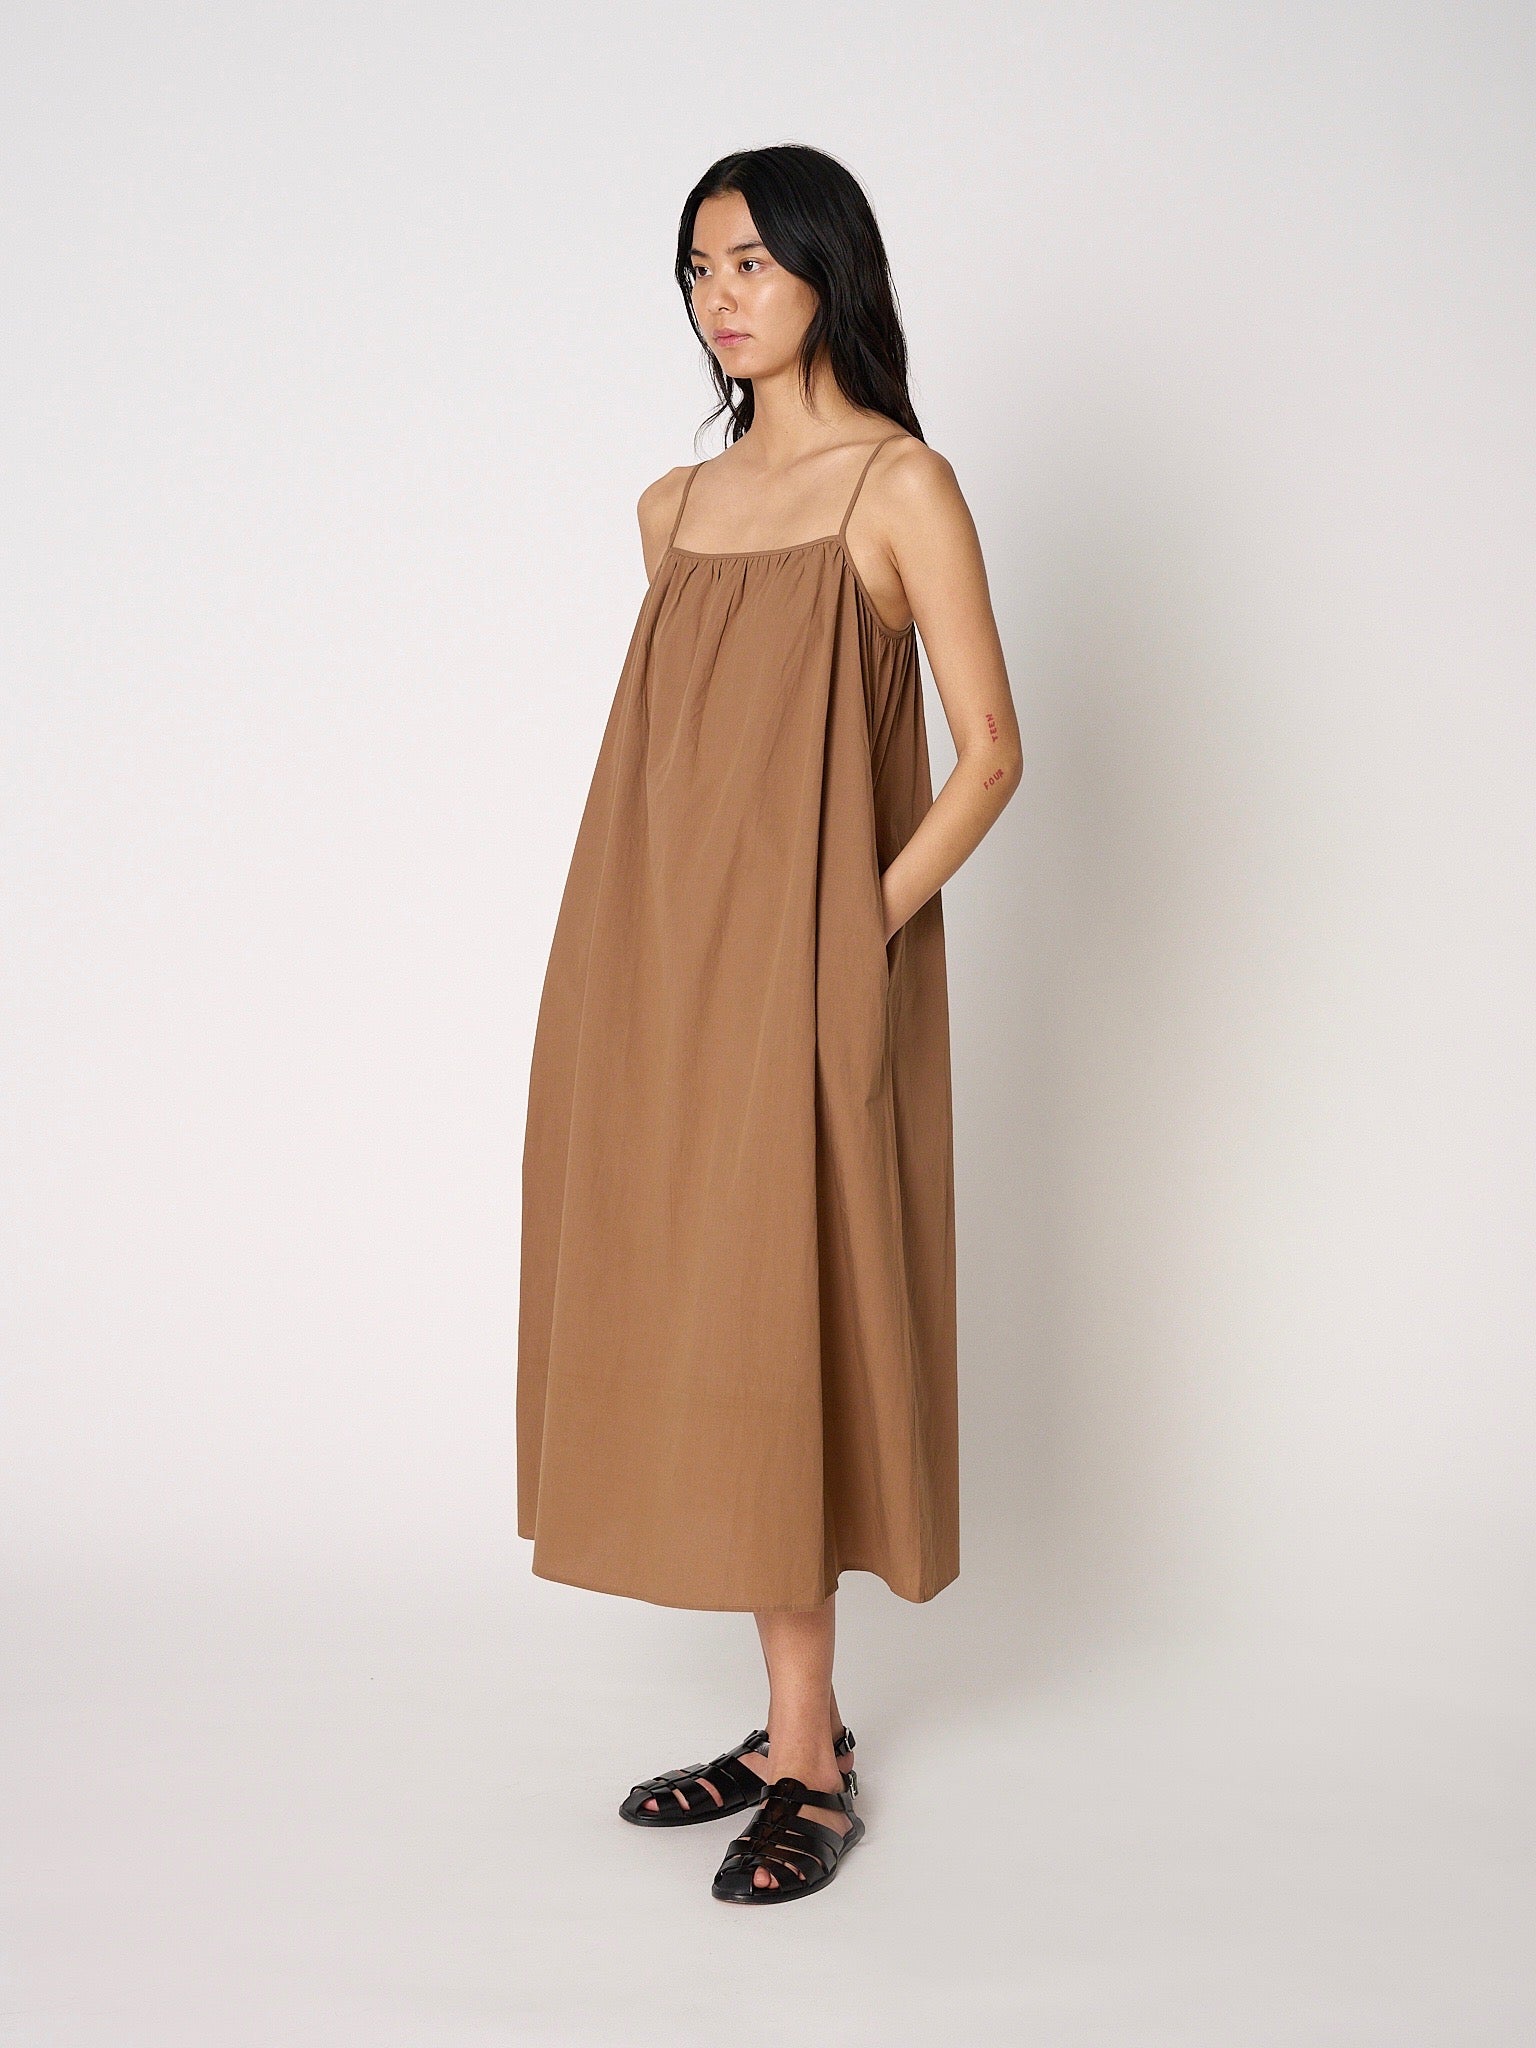 Thumbnail image of Hyeres Dress Voile in Tobacco